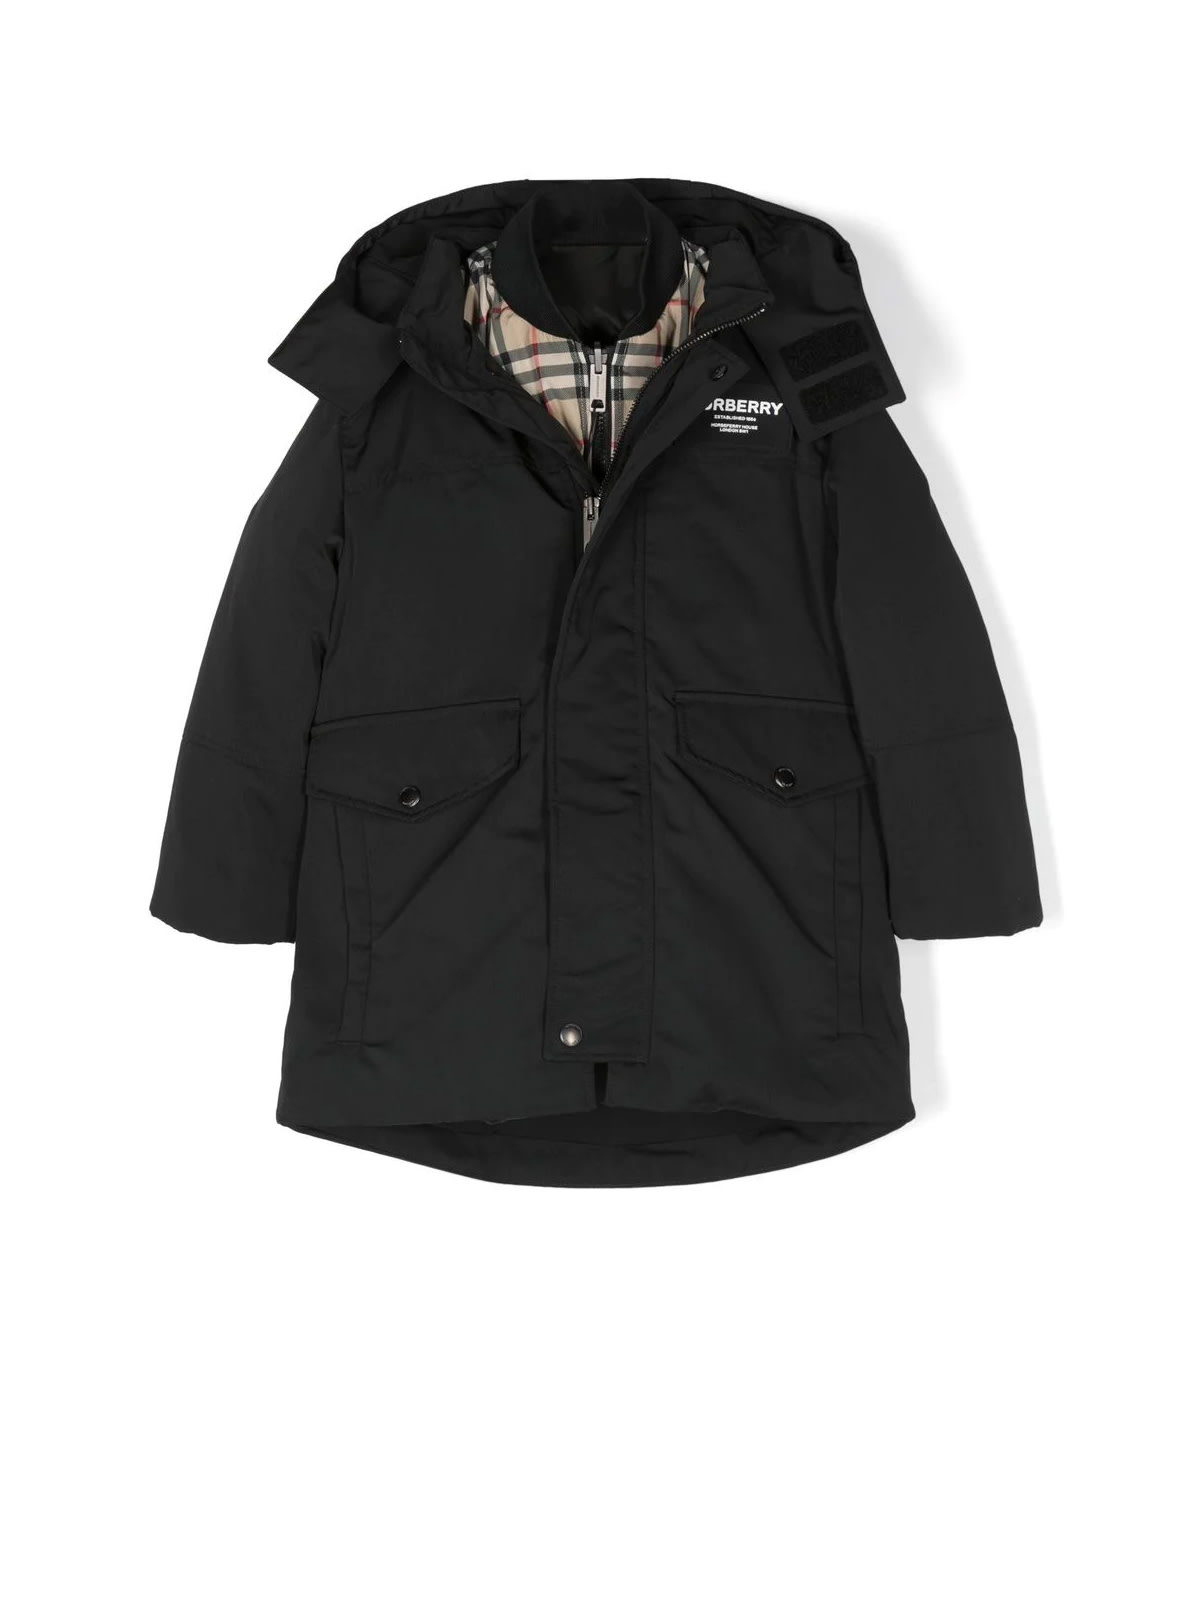 Burberry Asher Down Jacket